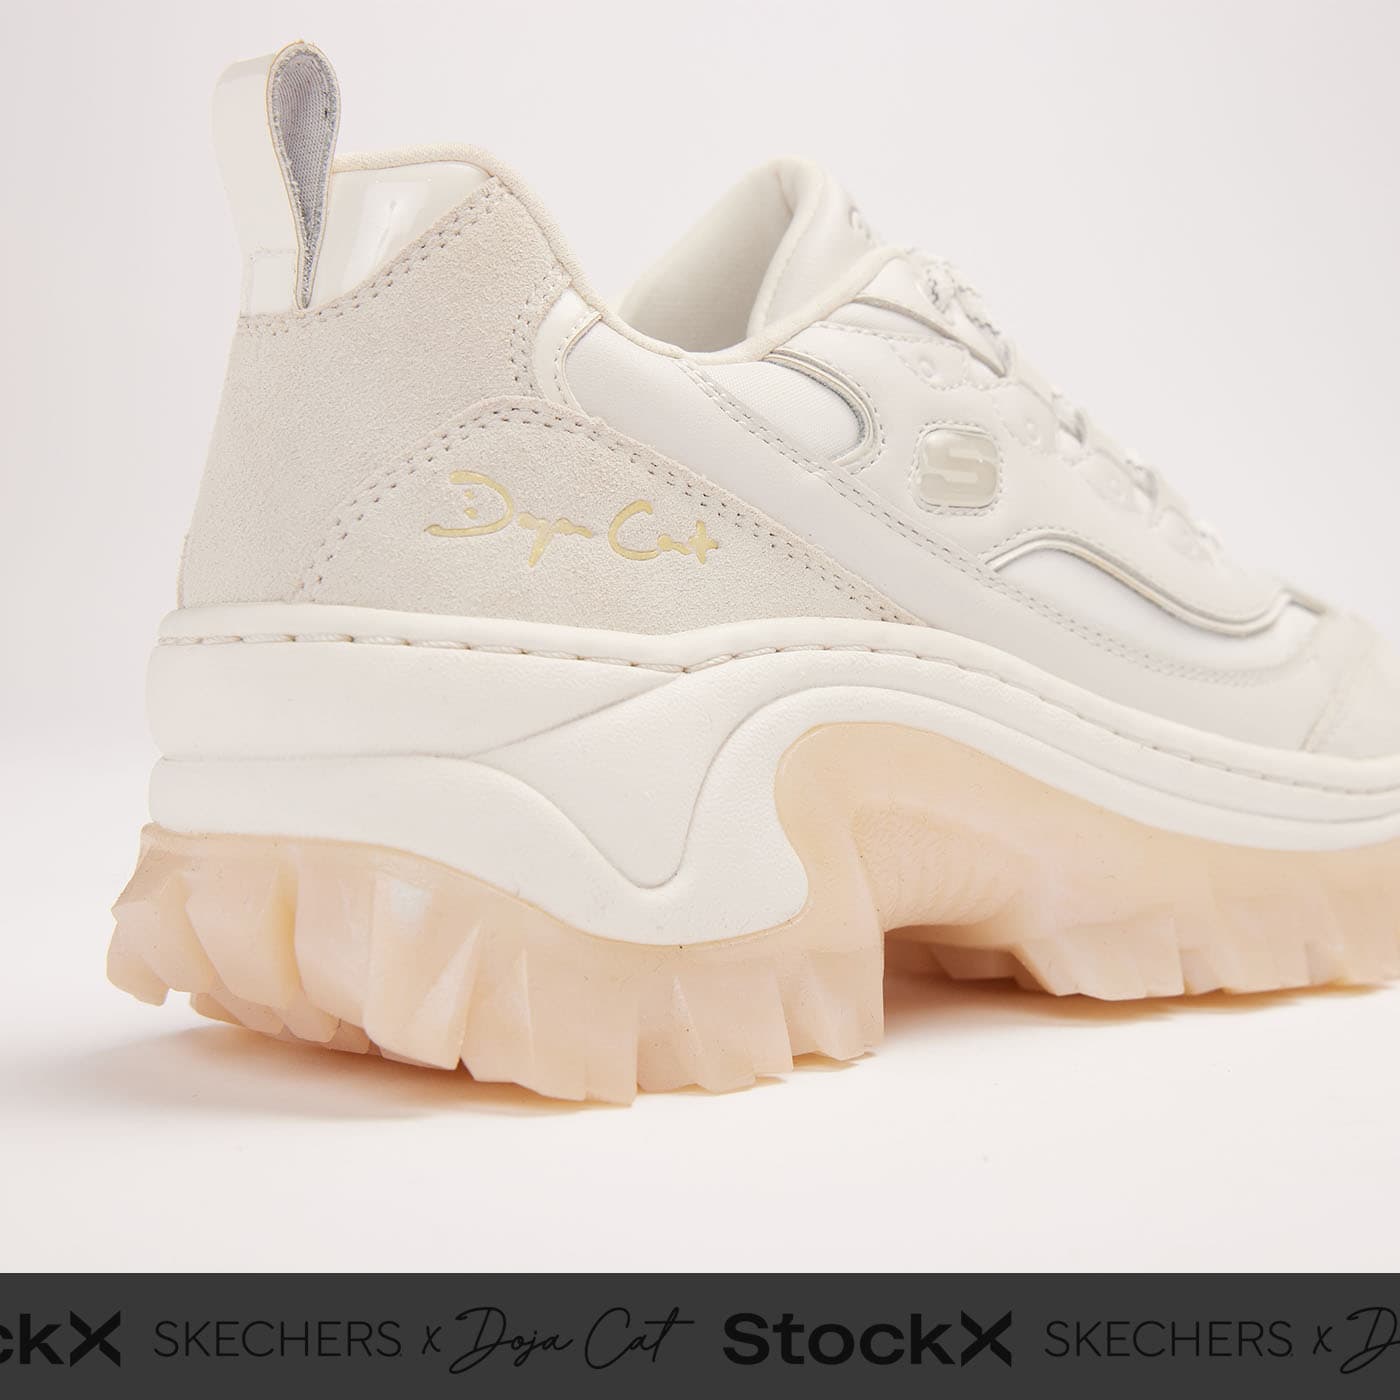 Doja Cat x @SKECHERS available now exclusively on @StockX 👟👹 Globa